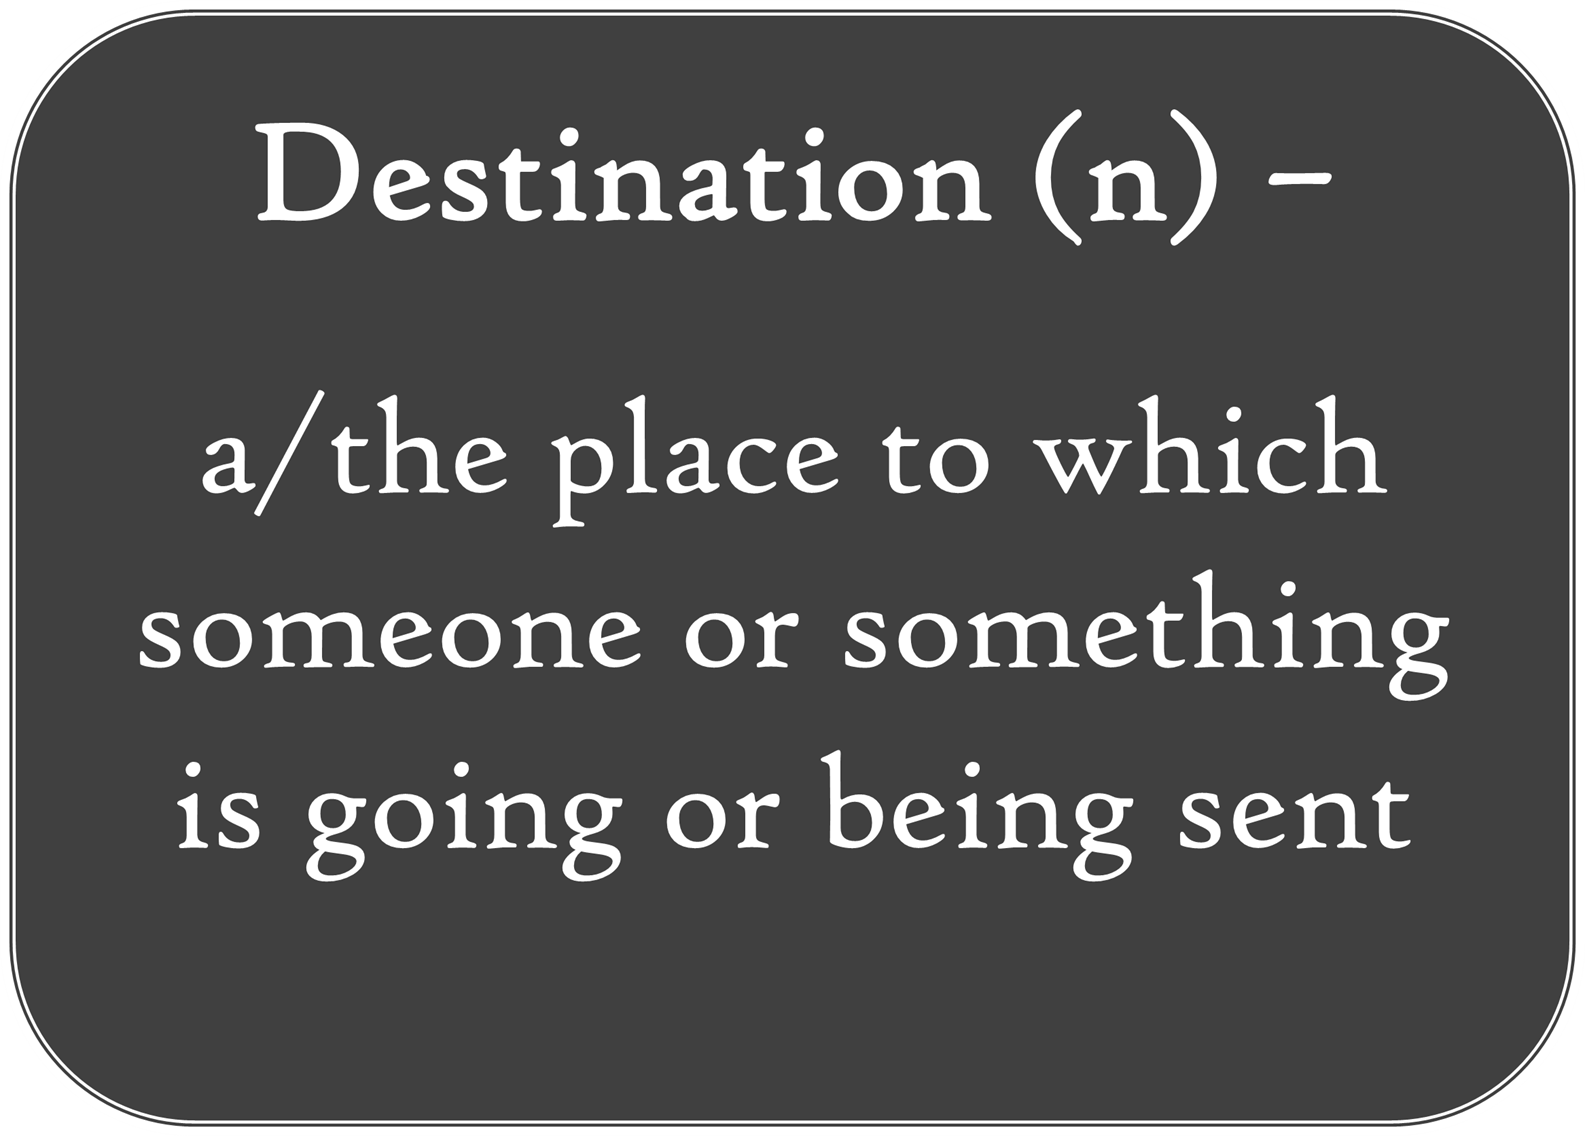 Destination a noun that describes "a place or the place to which someone is going'.